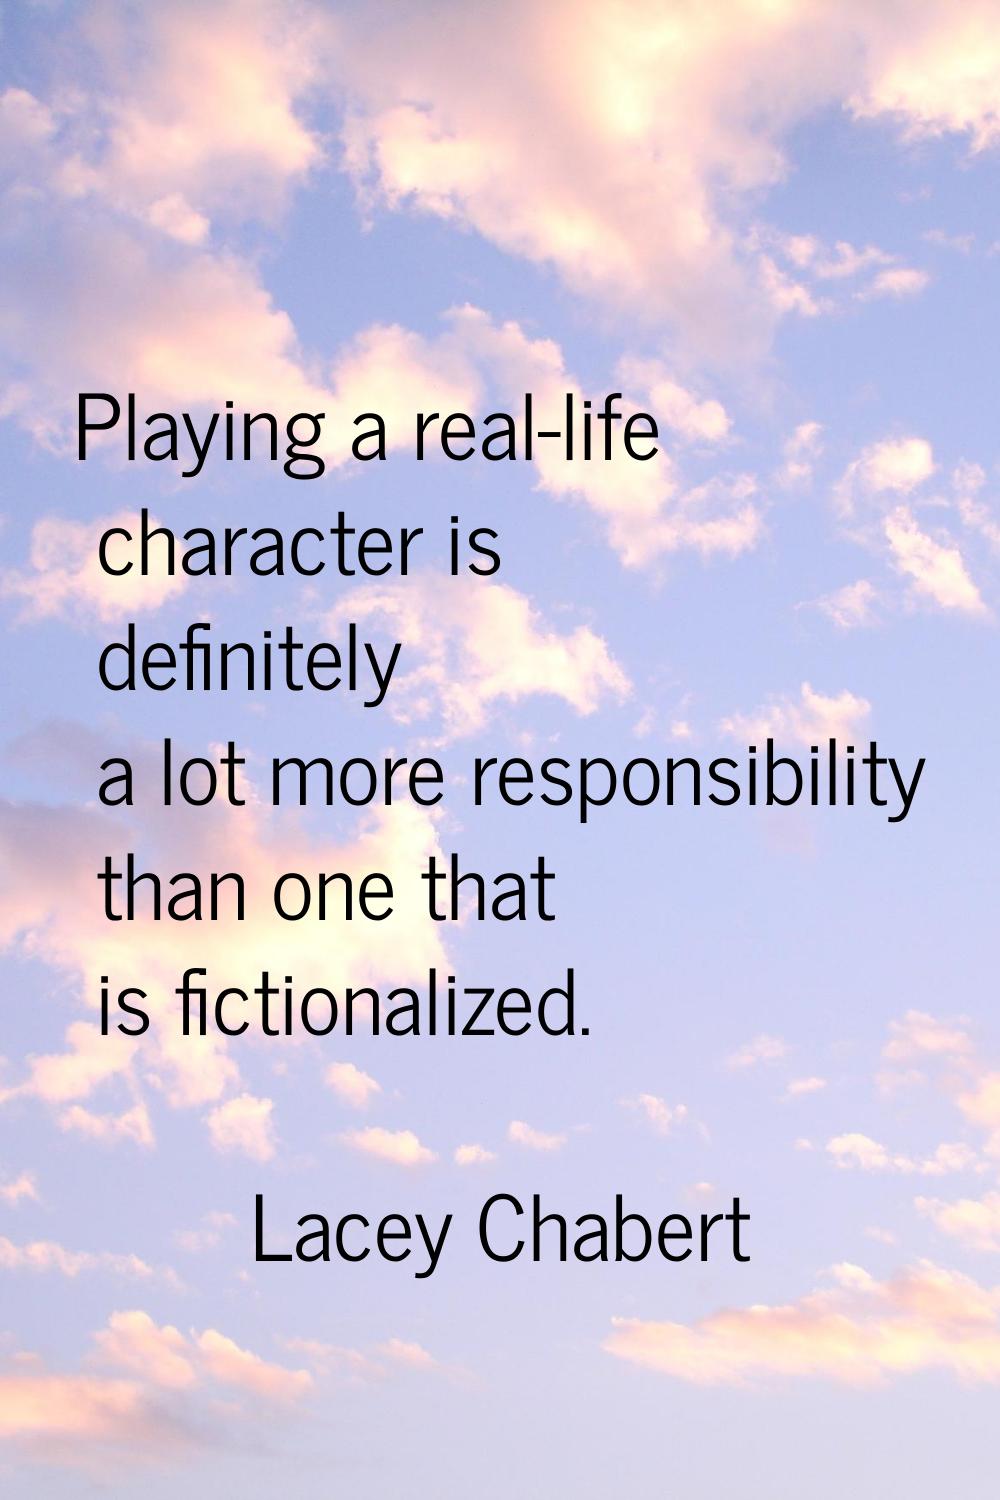 Playing a real-life character is definitely a lot more responsibility than one that is fictionalize